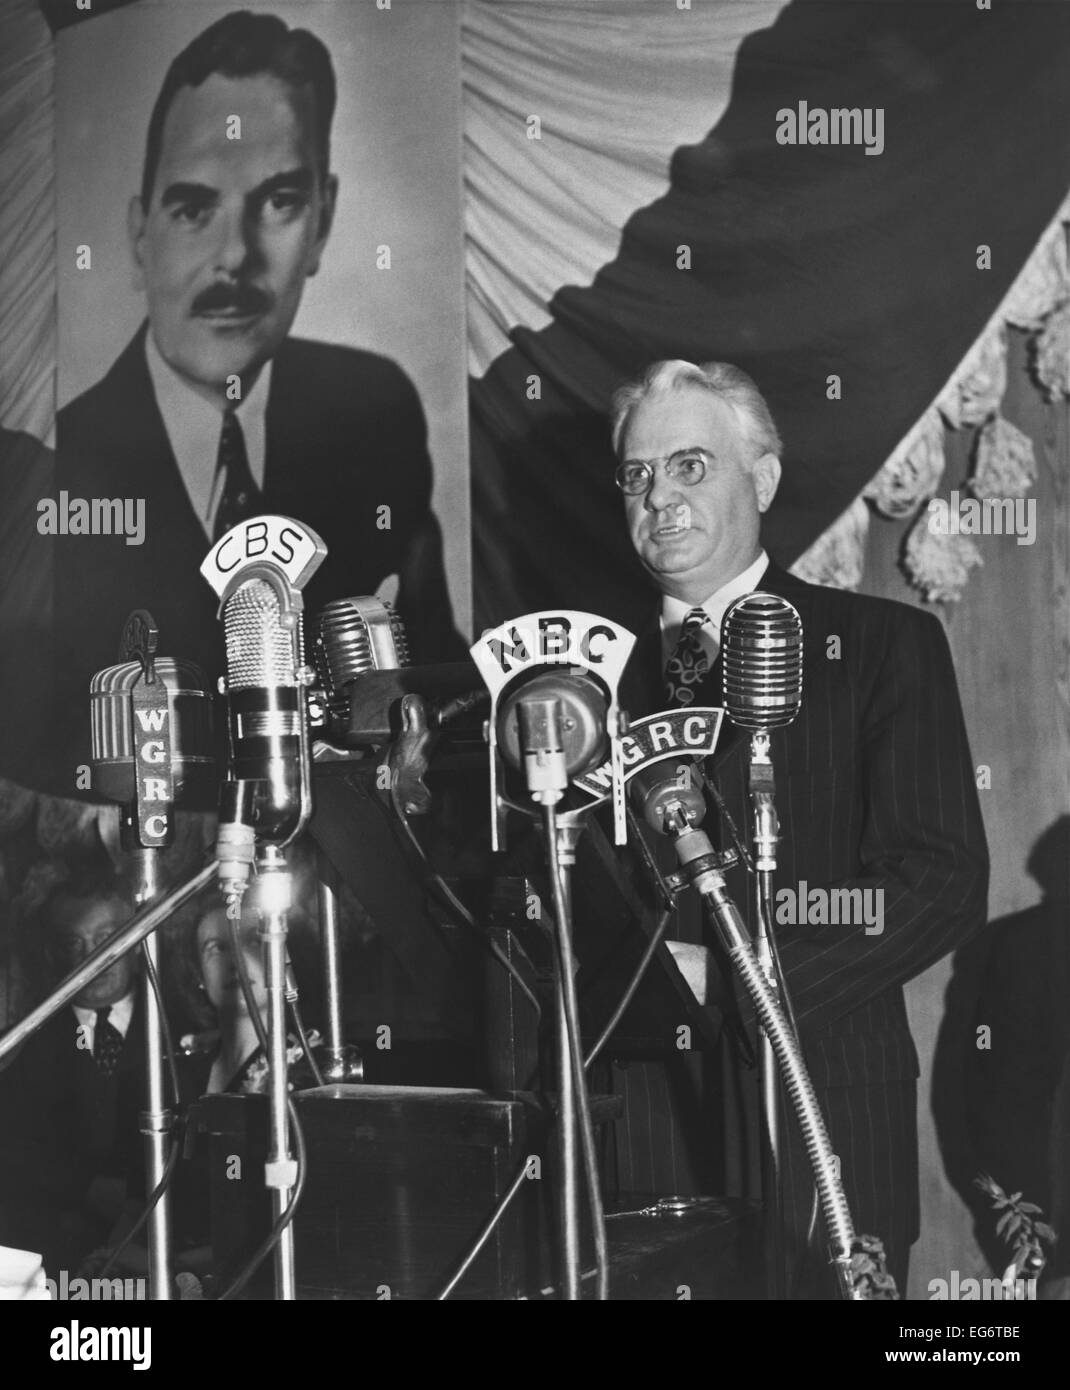 Ohio Governor John Bricker accepting the 1944 Republican vice presidential nomination. His campaign speeches attacked the 1930s Stock Photo